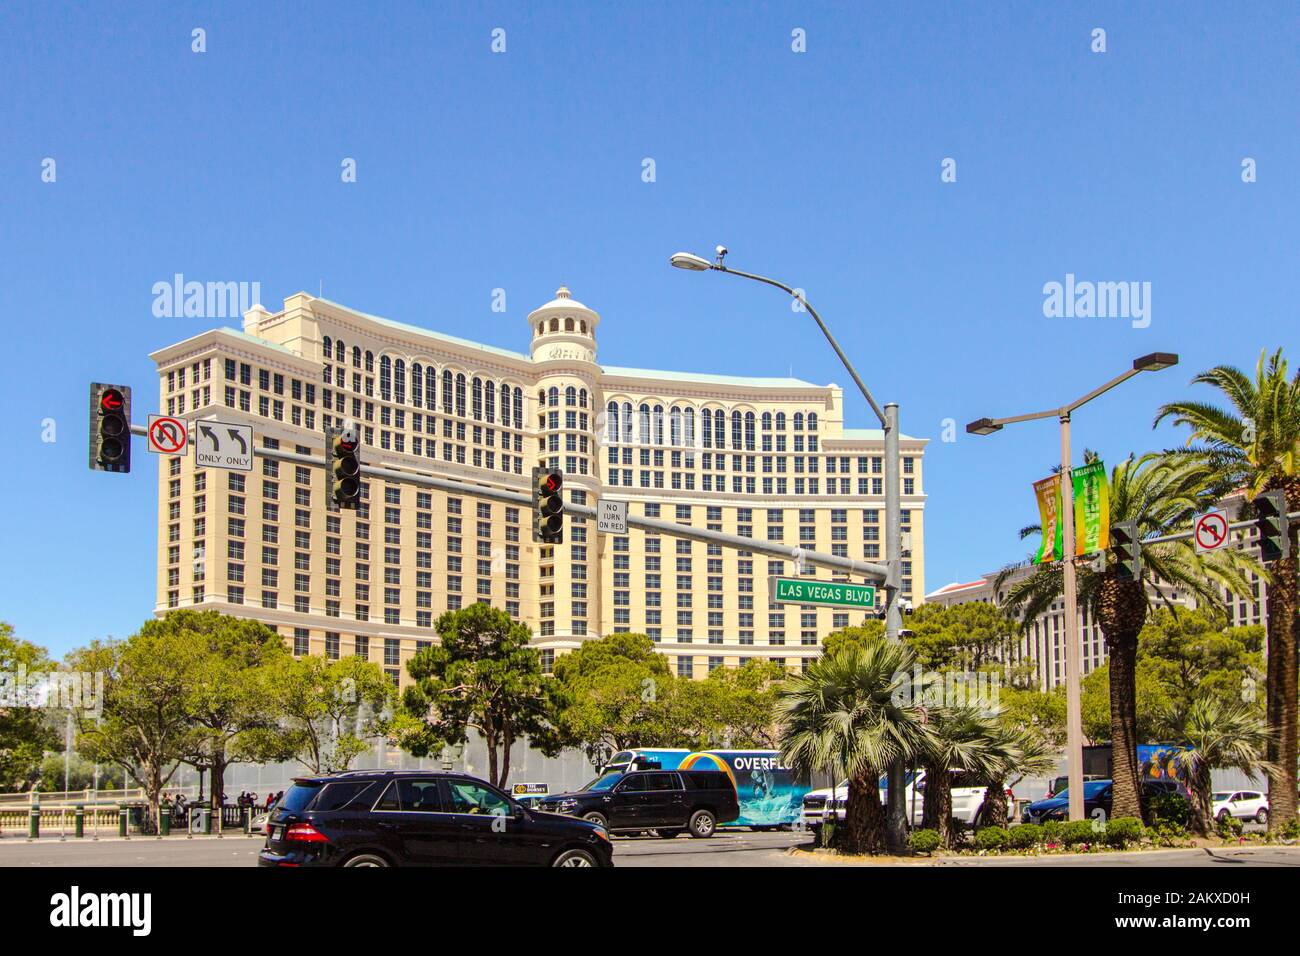 Las Vegas, Nevada, USA - May 6, 2019: The busy intersection of Las Vegas Boulevard and Flamingo Road with traffic light on the Las Vegas Strip. Stock Photo